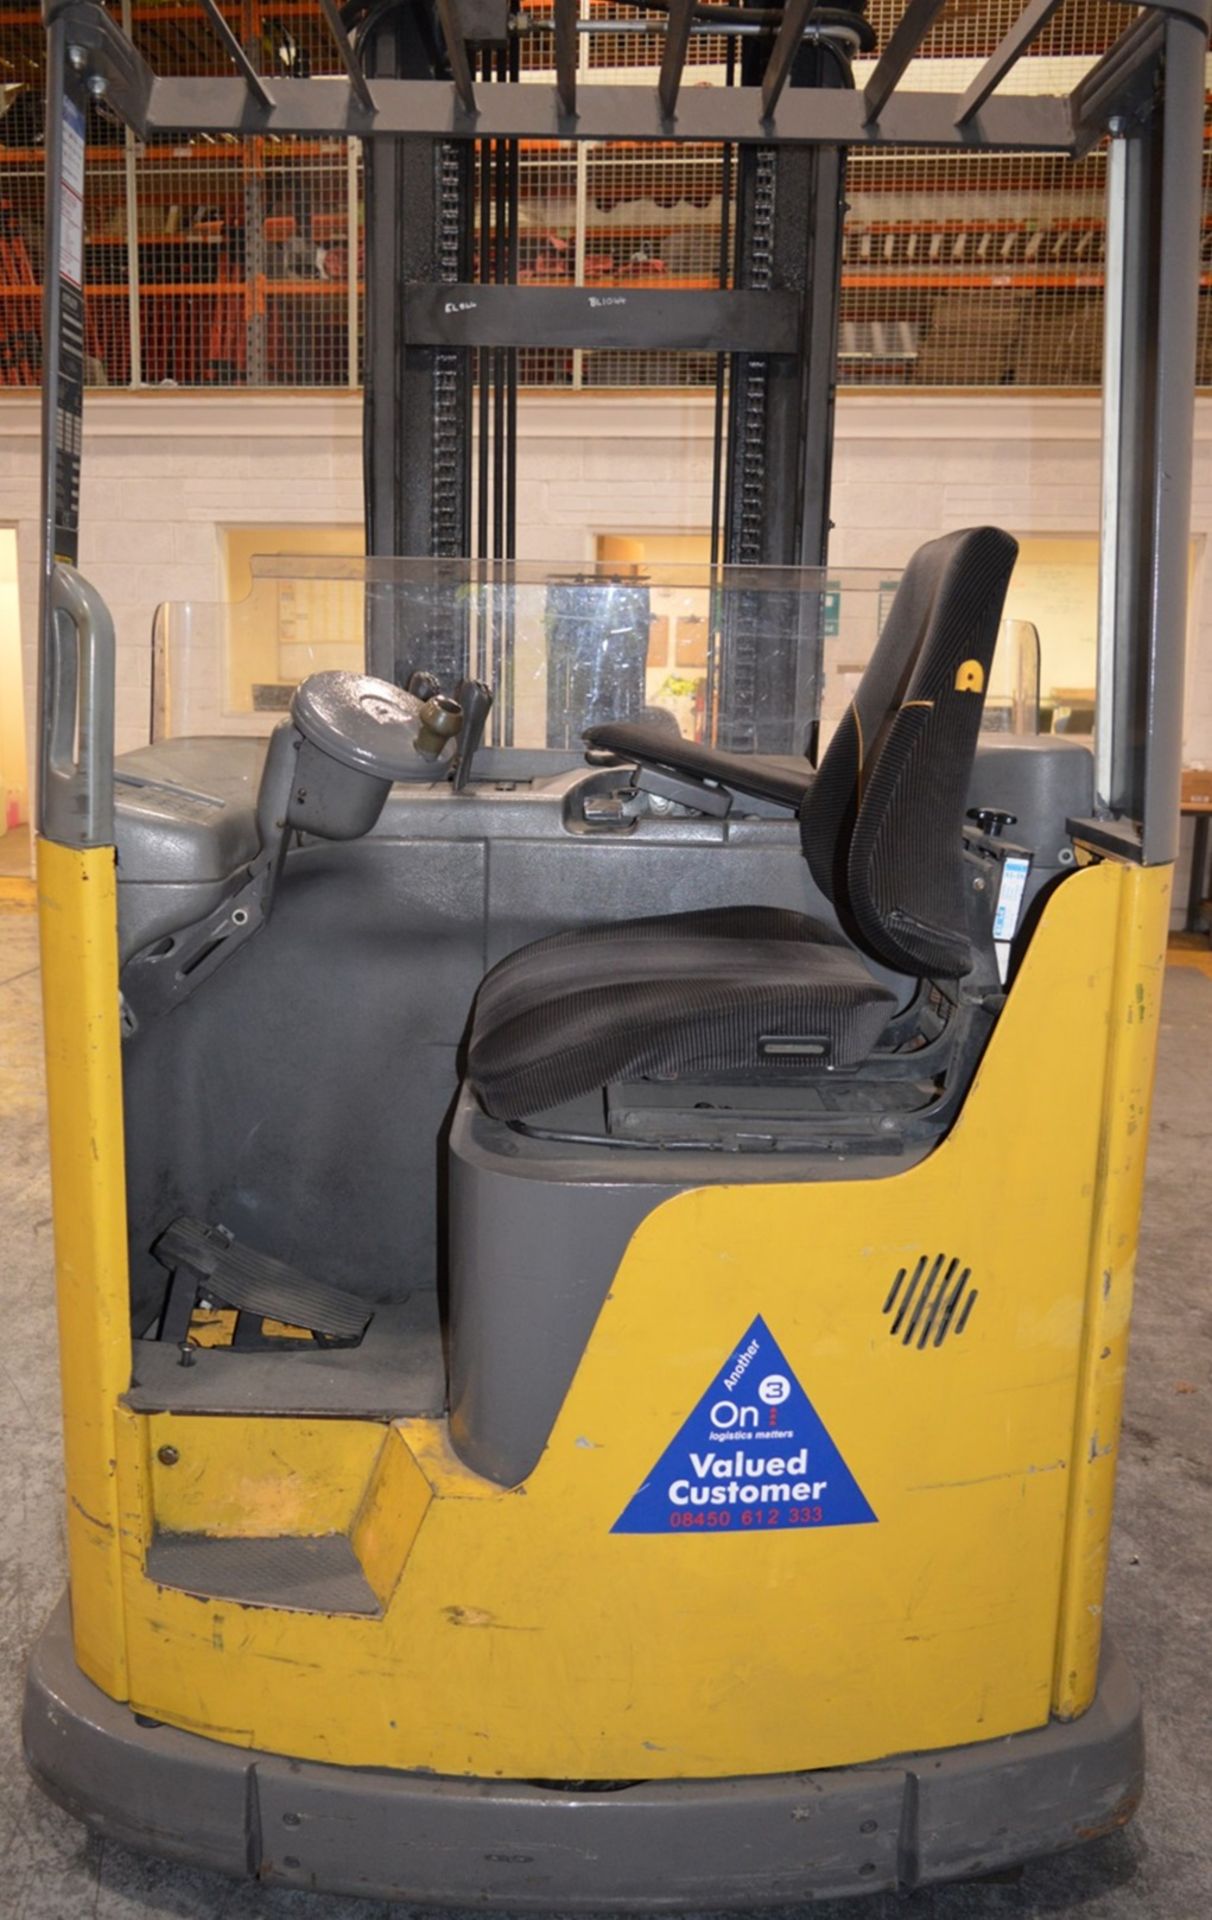 1 x Atlet Electric Forklift Reach Truck - 1997 - Model 200DTFVXM 660 UHS - Includes Operation Code - Image 9 of 12